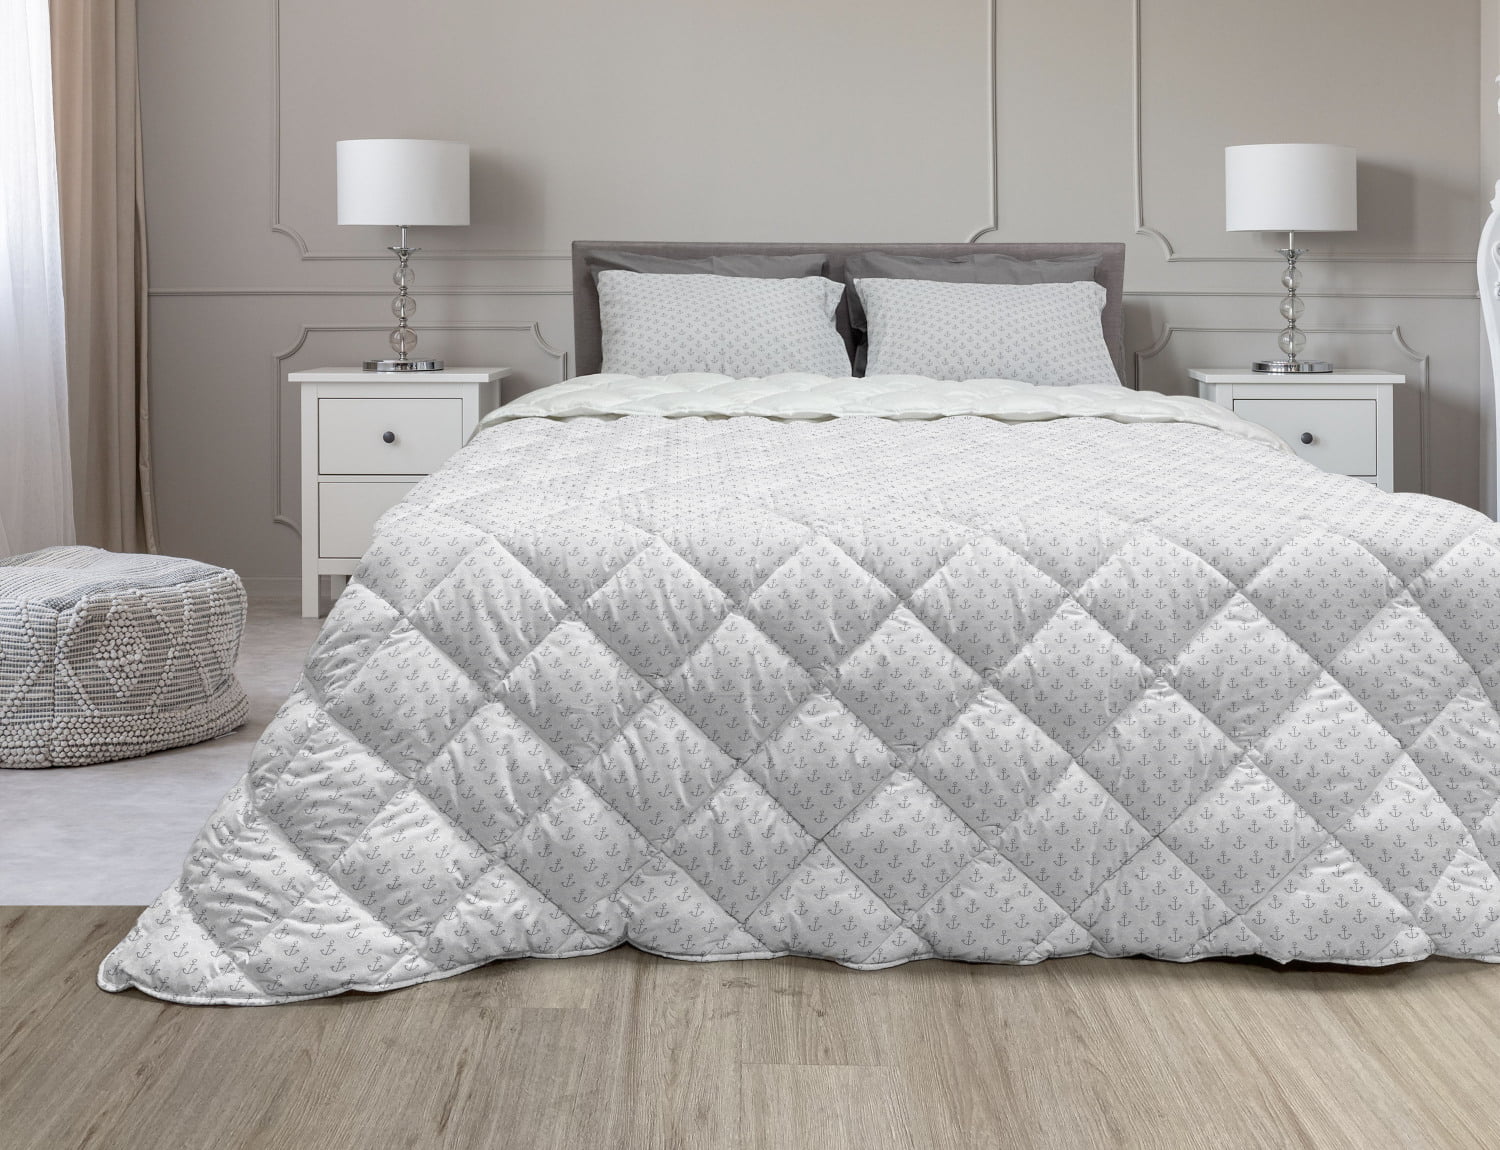 EXTRA THICK WAVE QUILTED PATTERN MATTRESS PAD BEDDING FITTED SKIRT IN 4 SIZES 